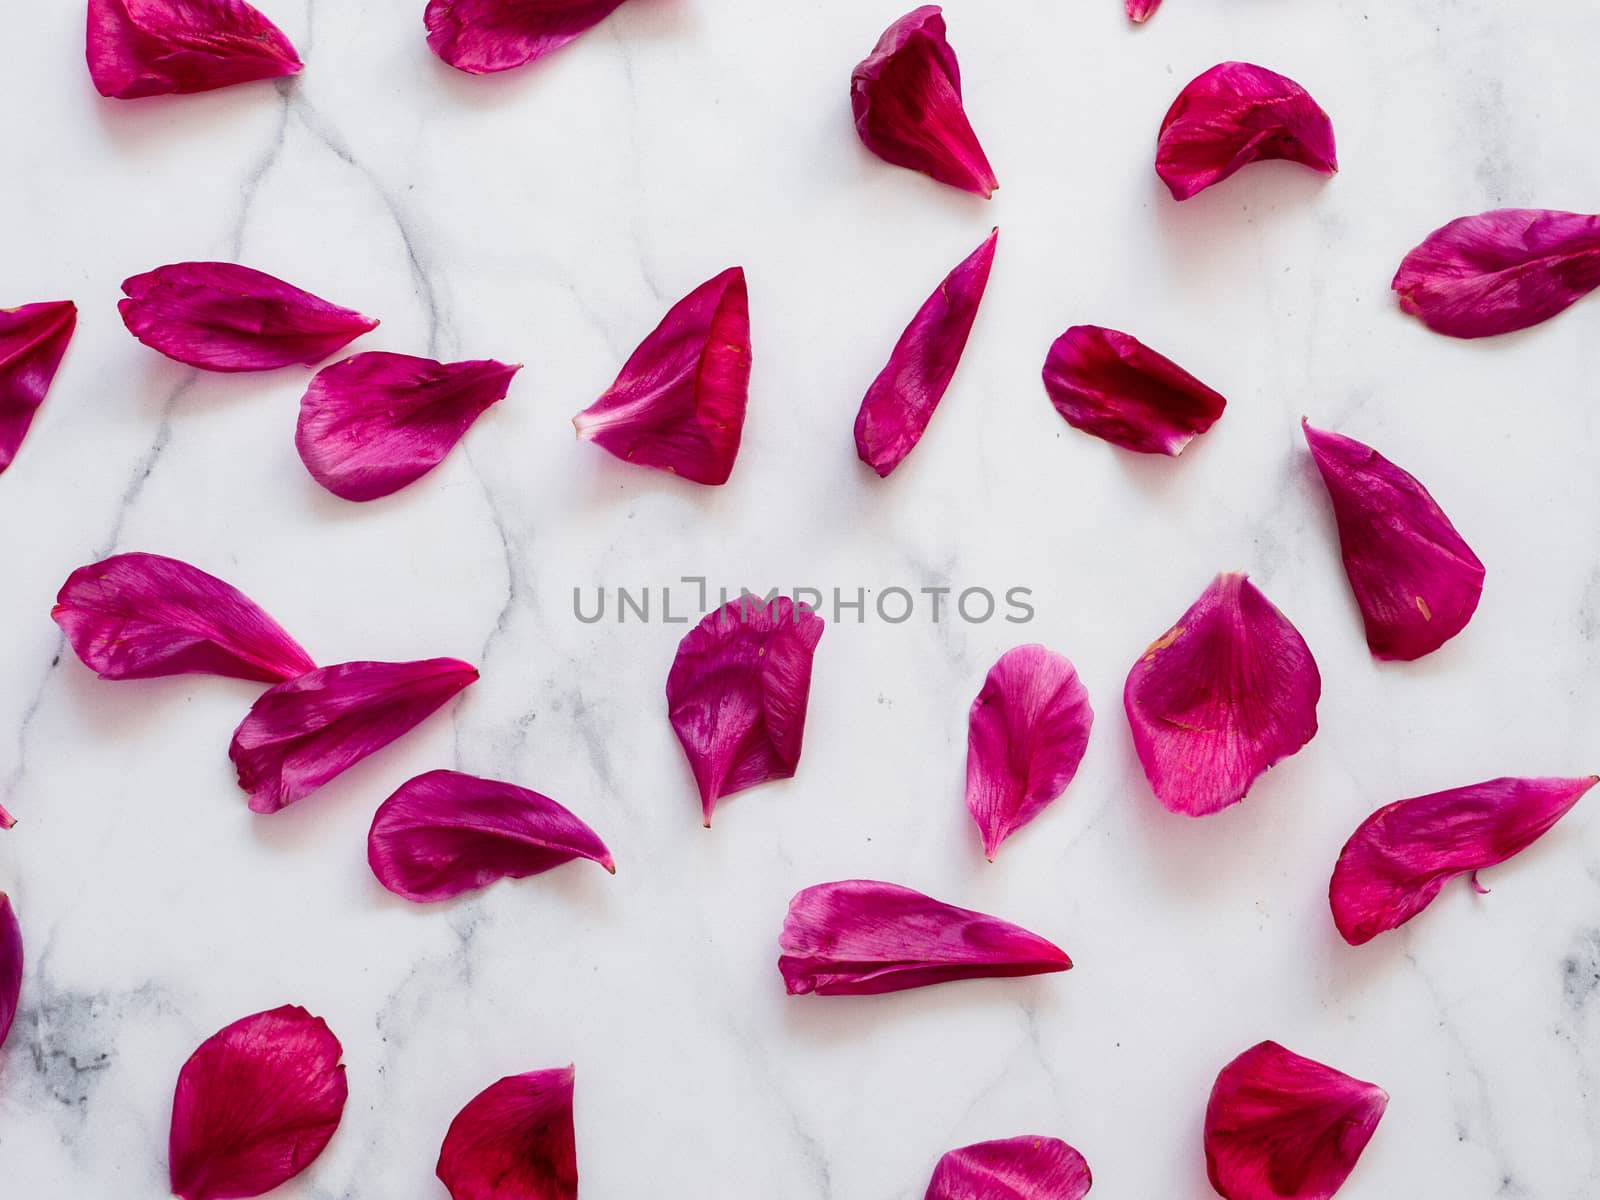 Red burgundy peony petals flat lay on white marble background. Flower petals for minimal holiday concept. Creative layout made of flowers leaves. Flat lay pattern.